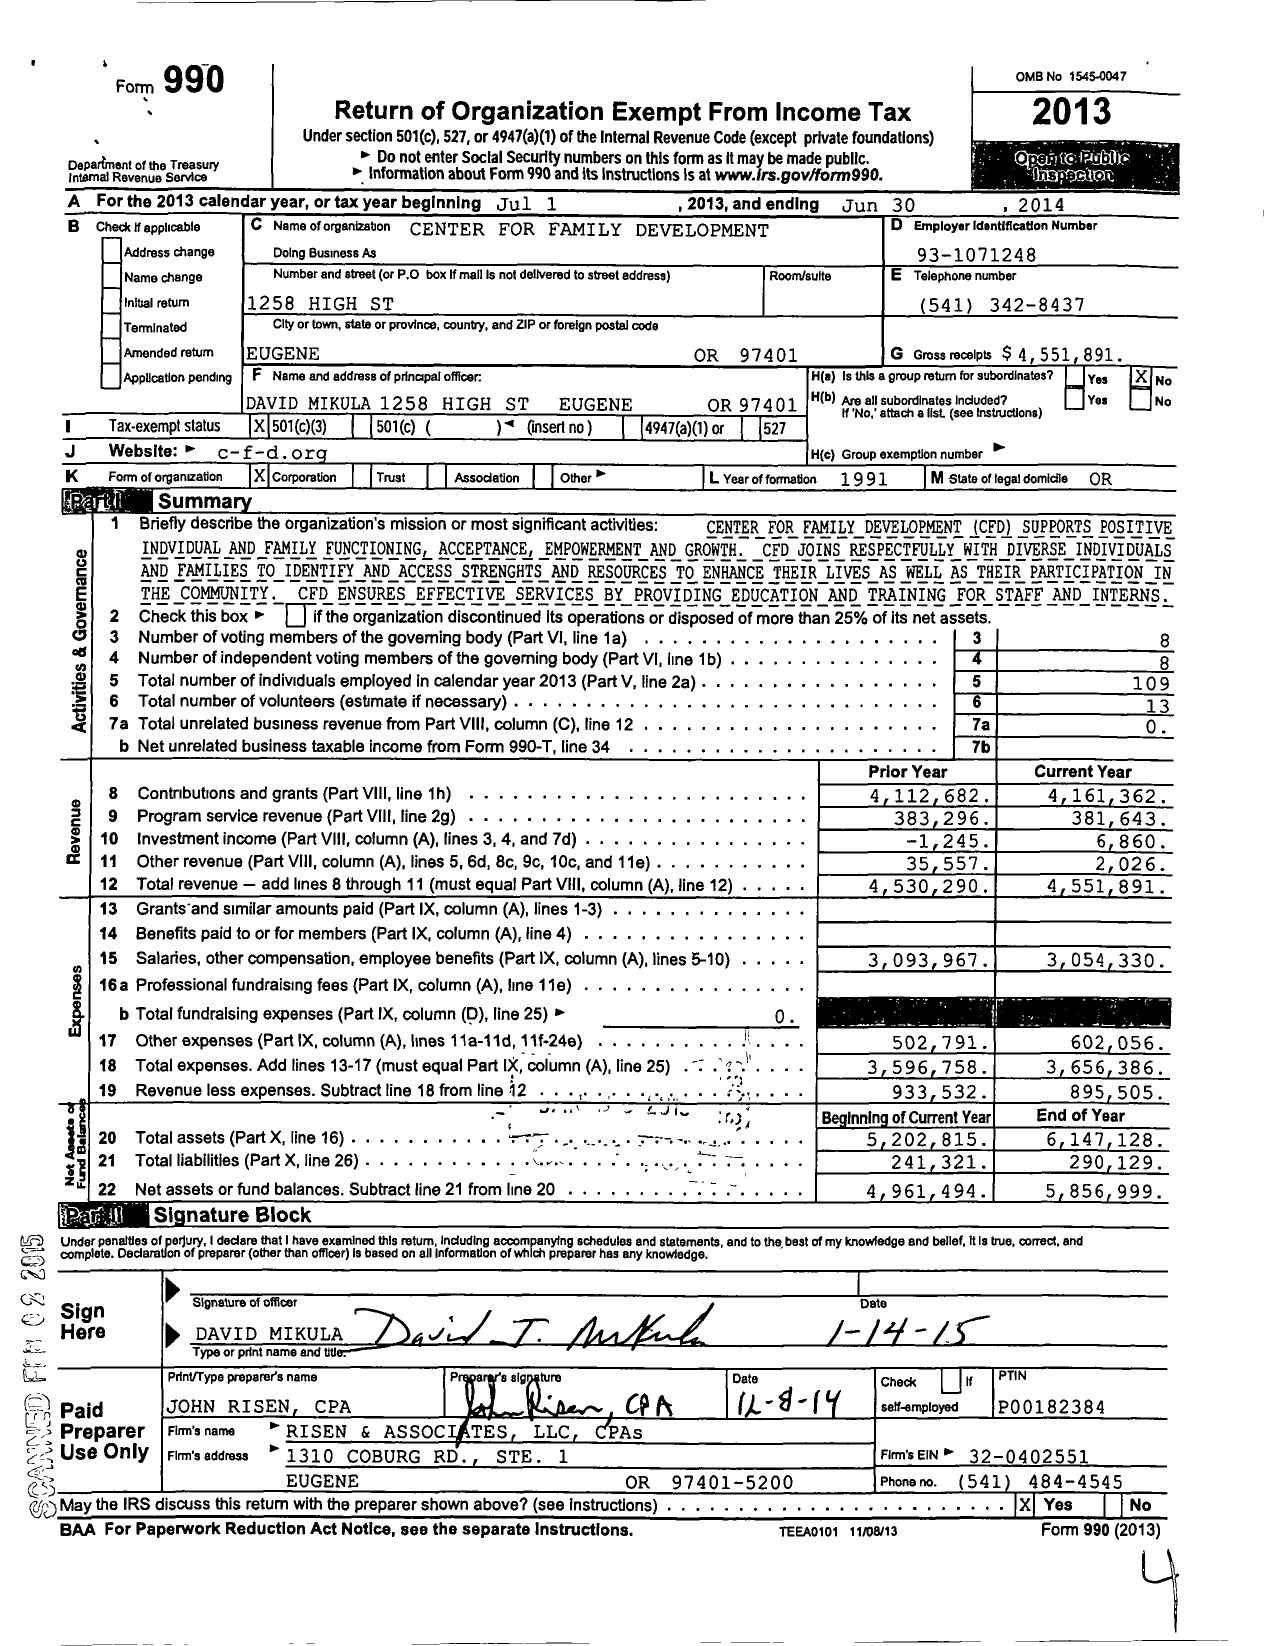 Image of first page of 2013 Form 990 for Center for Family Development (CFD)